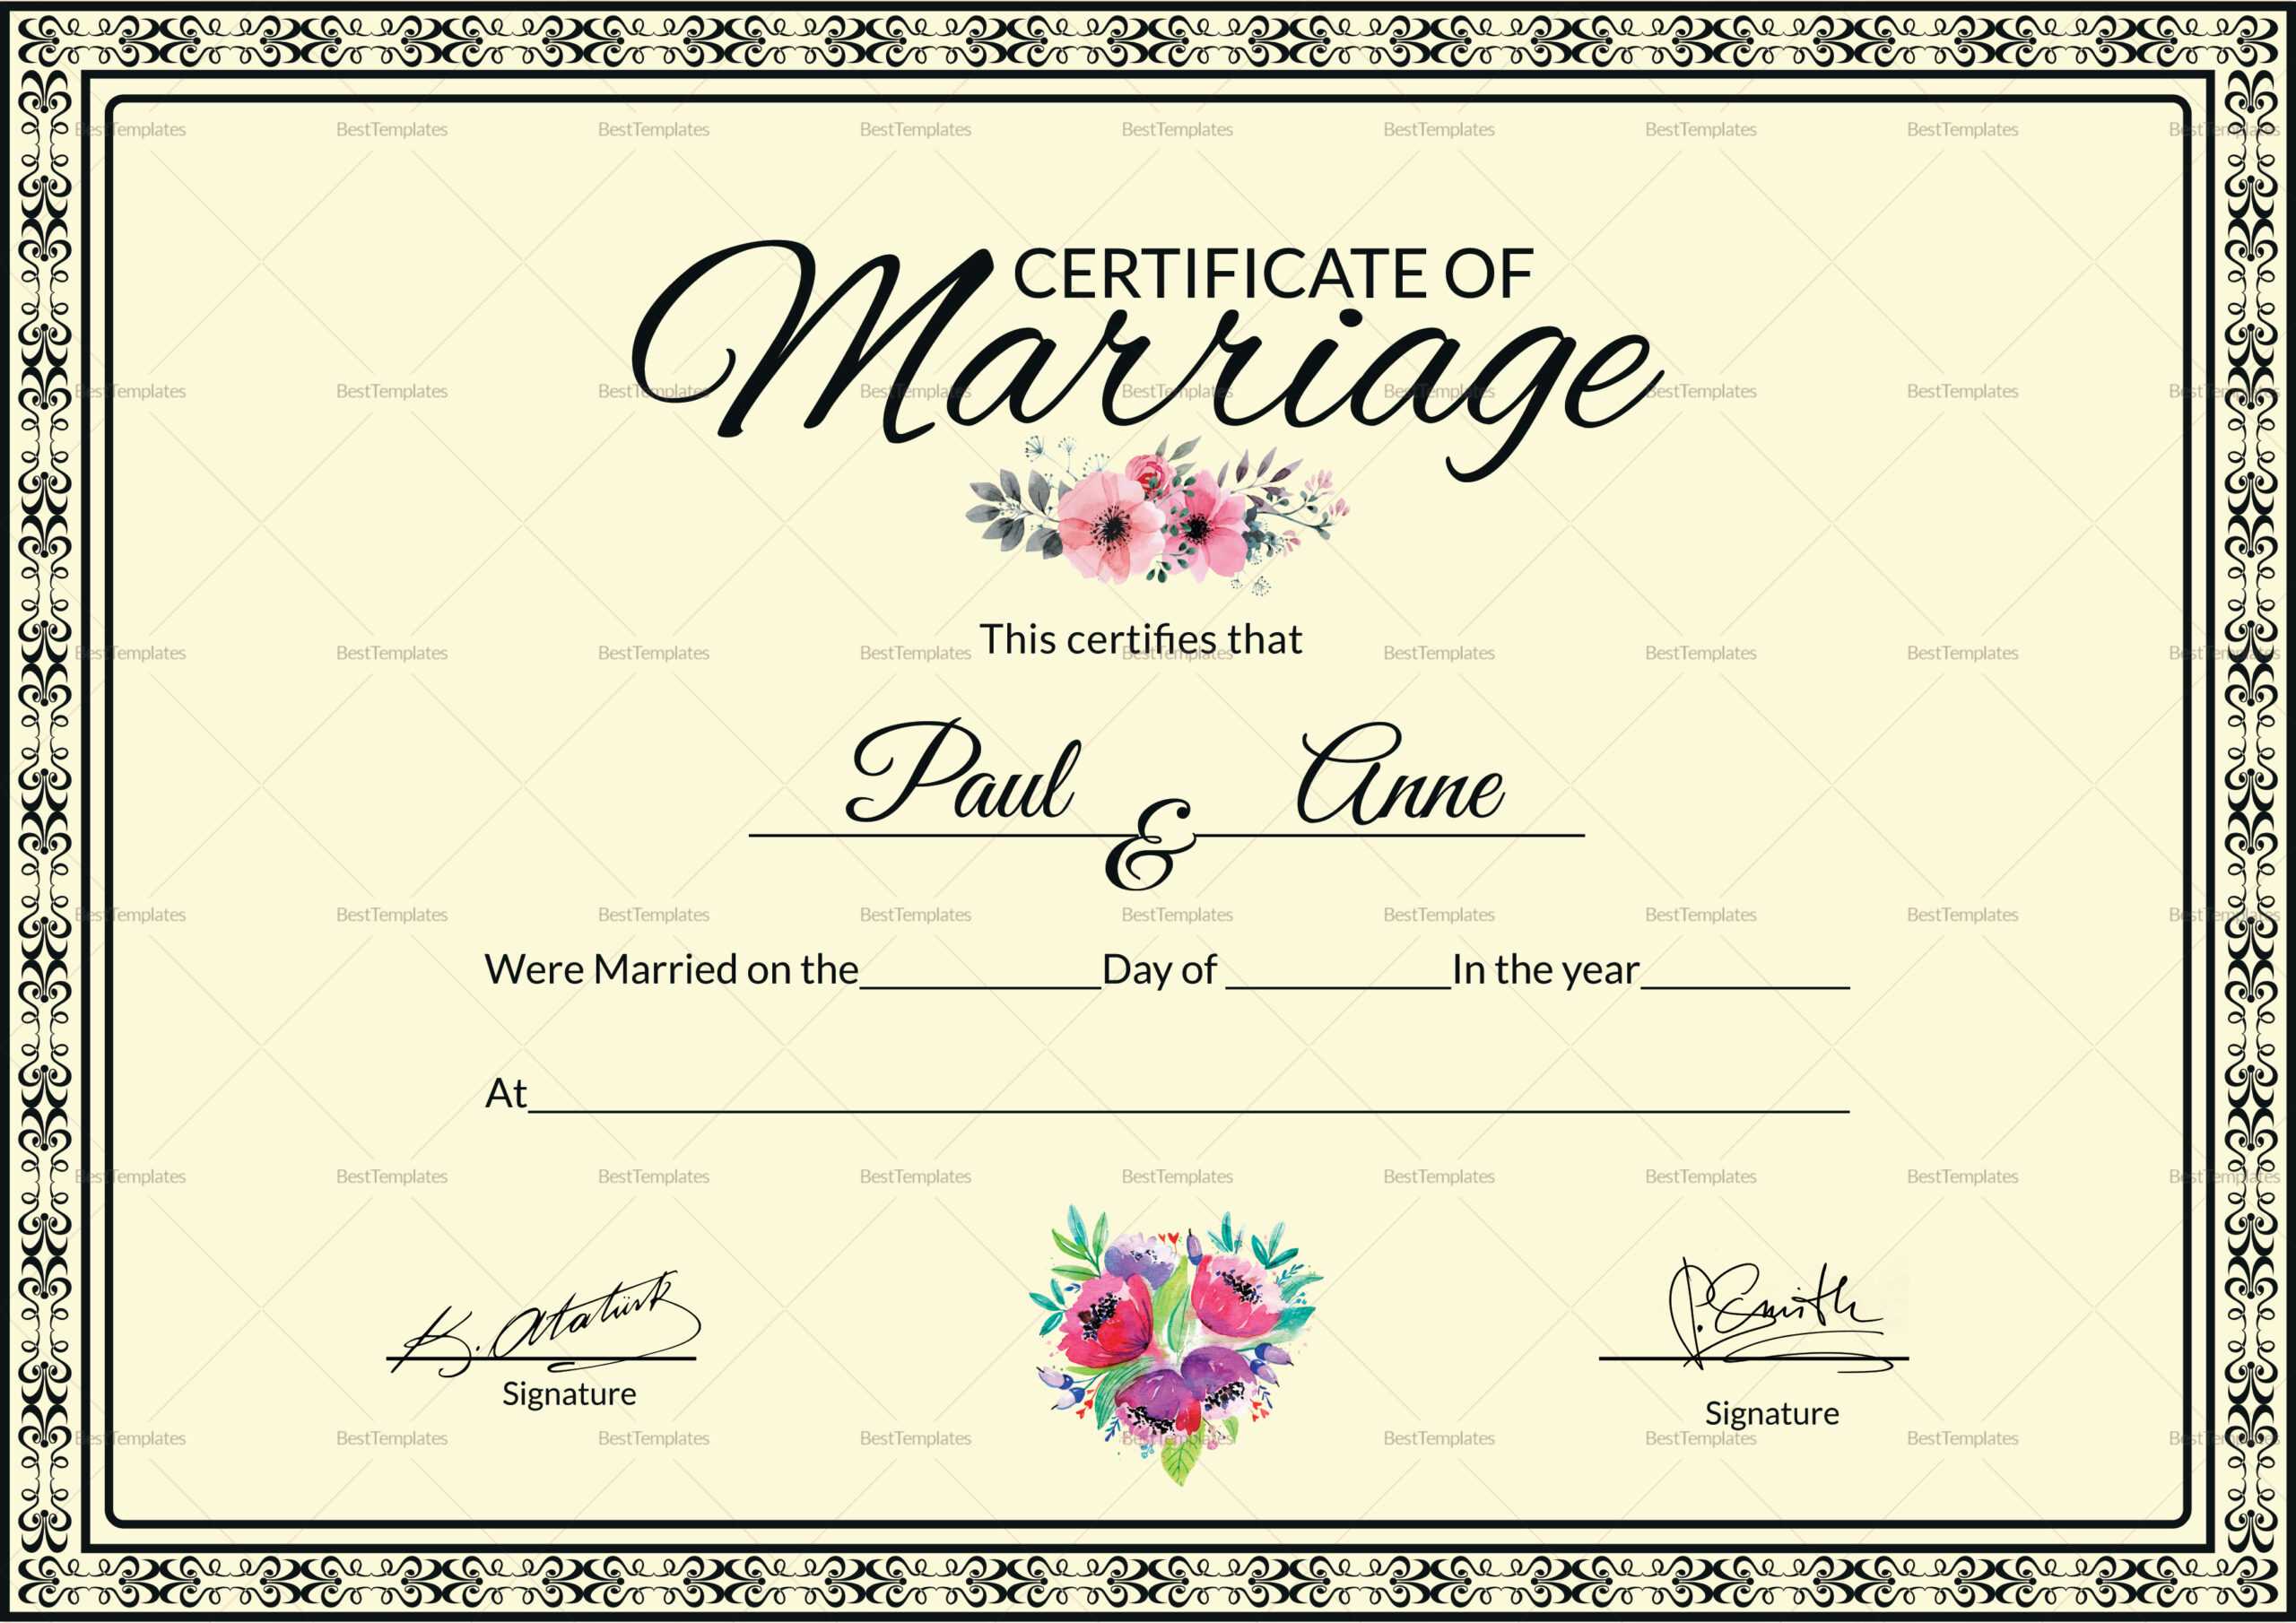 Certificate Of Marriage Template – Atlantaauctionco For Certificate Of Marriage Template